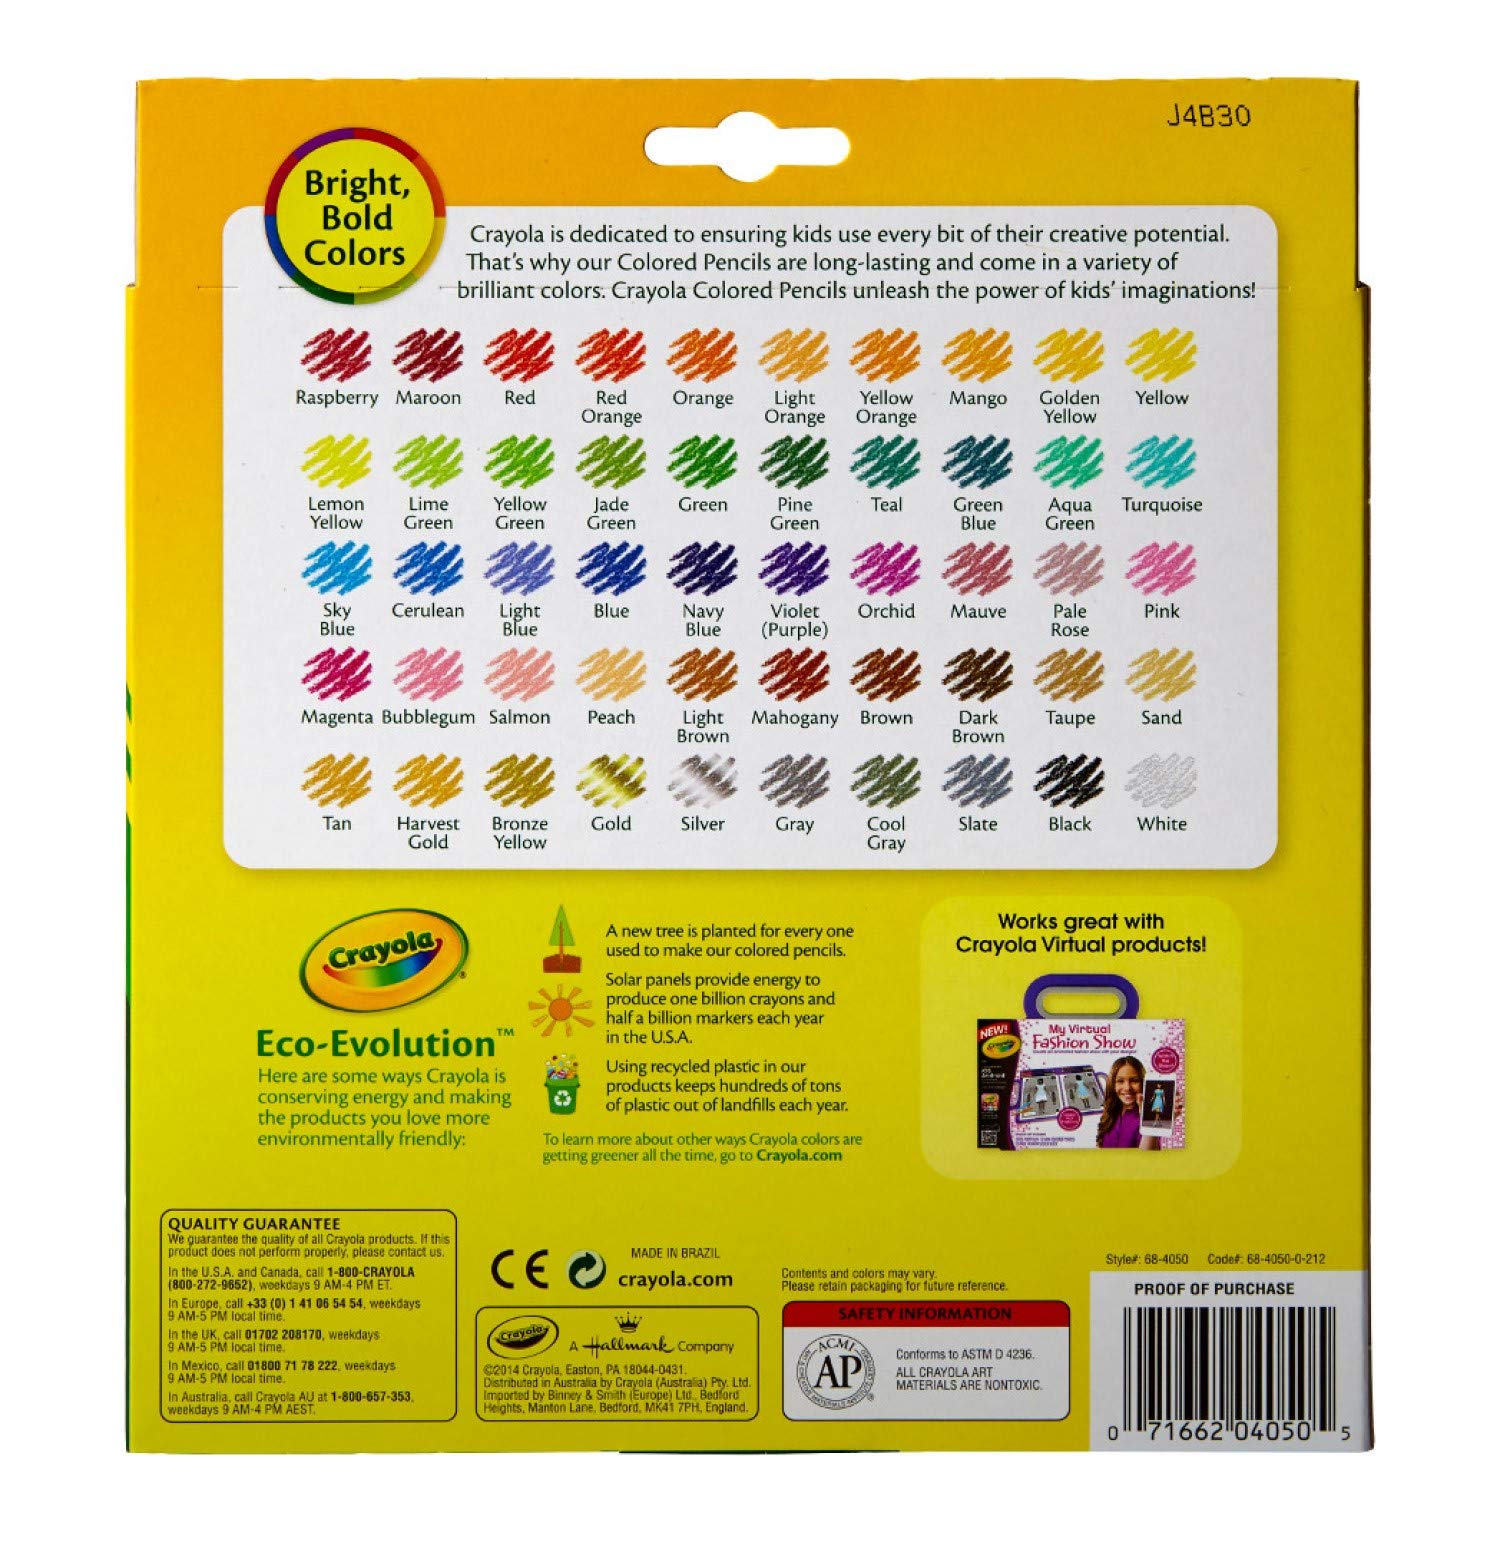 Crayola Colored Pencils, Assorted Colors, 50 Count, Gift